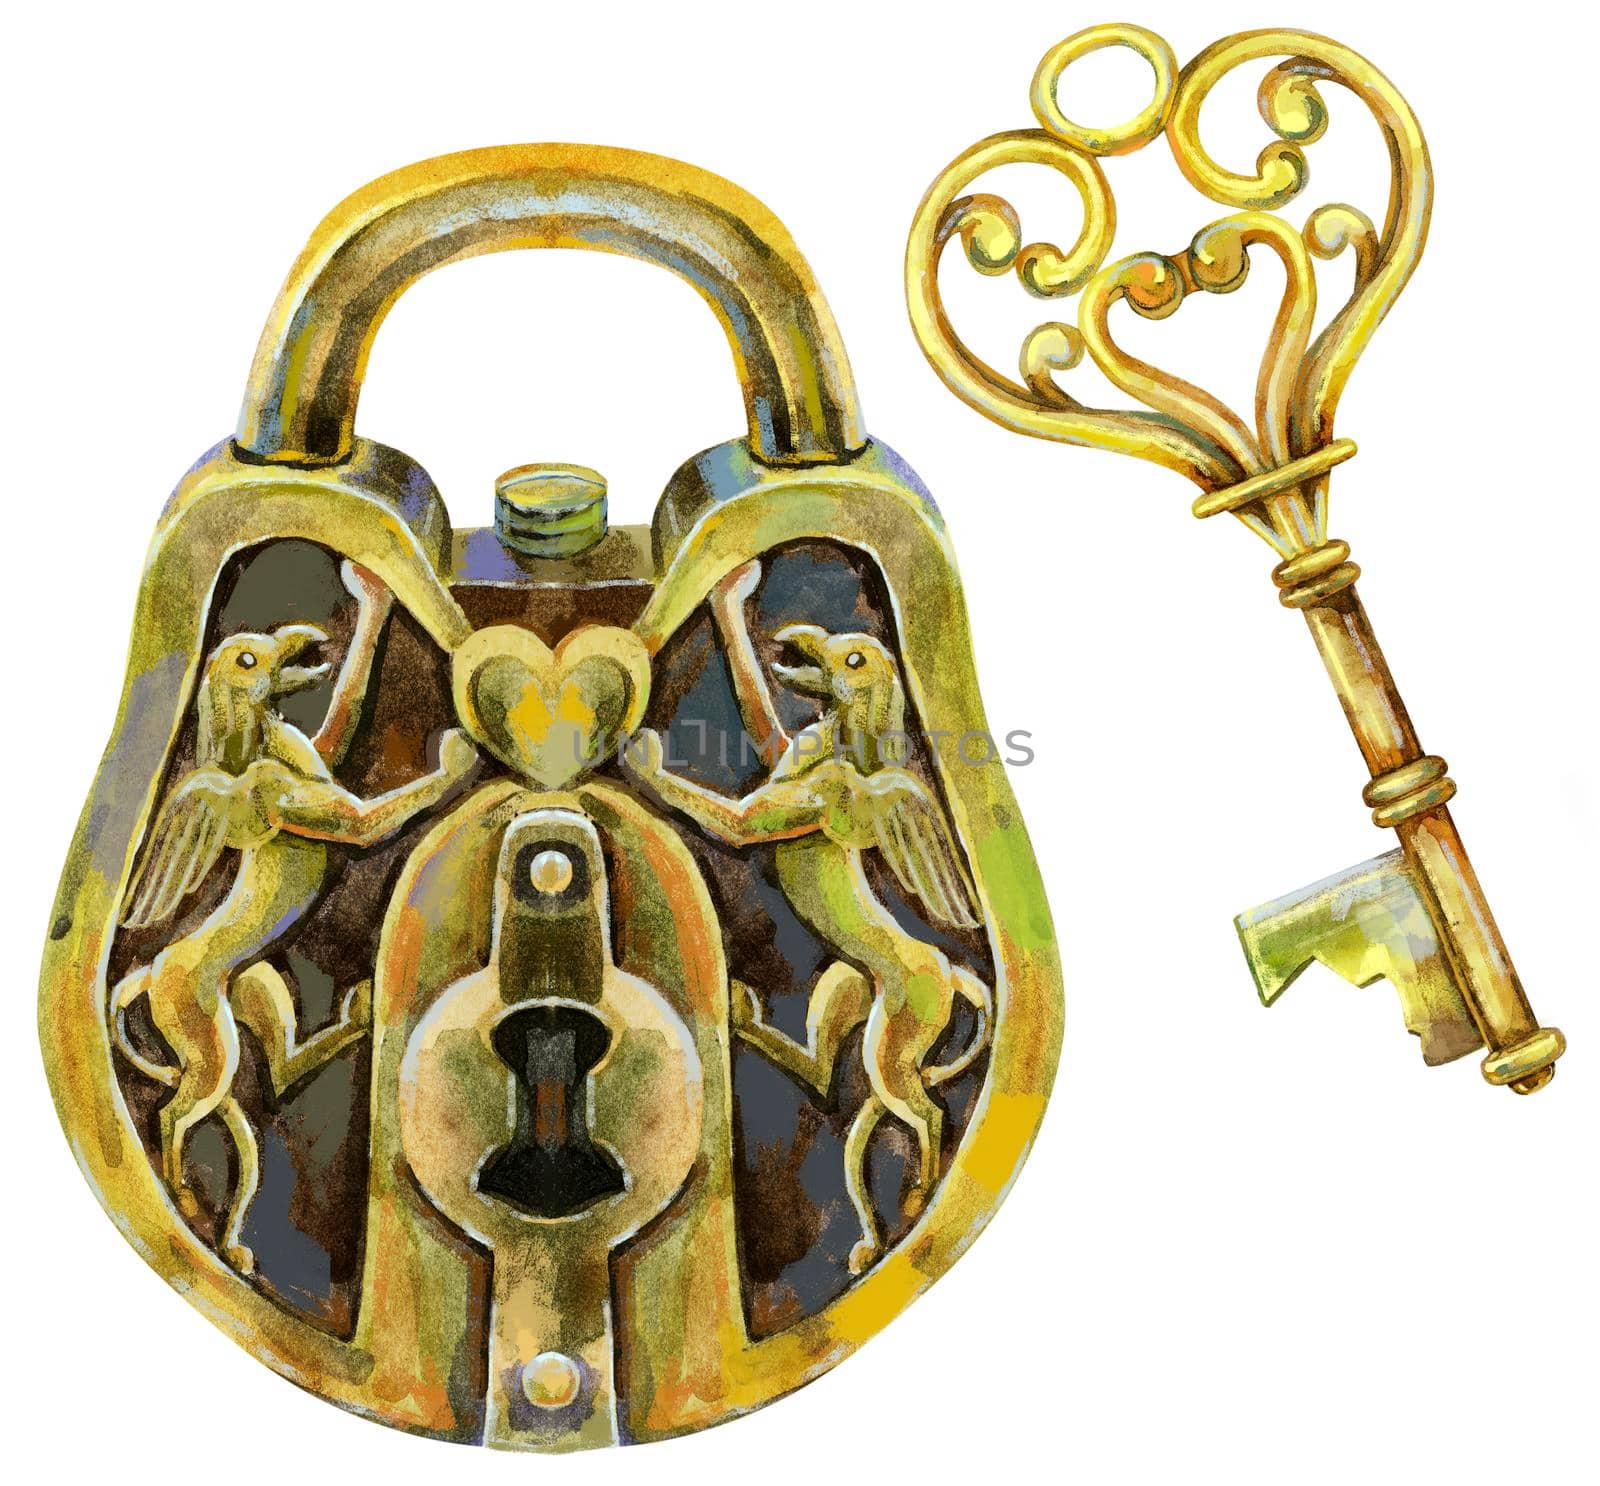 Golden lock and key. Watercolor illustration on a white background